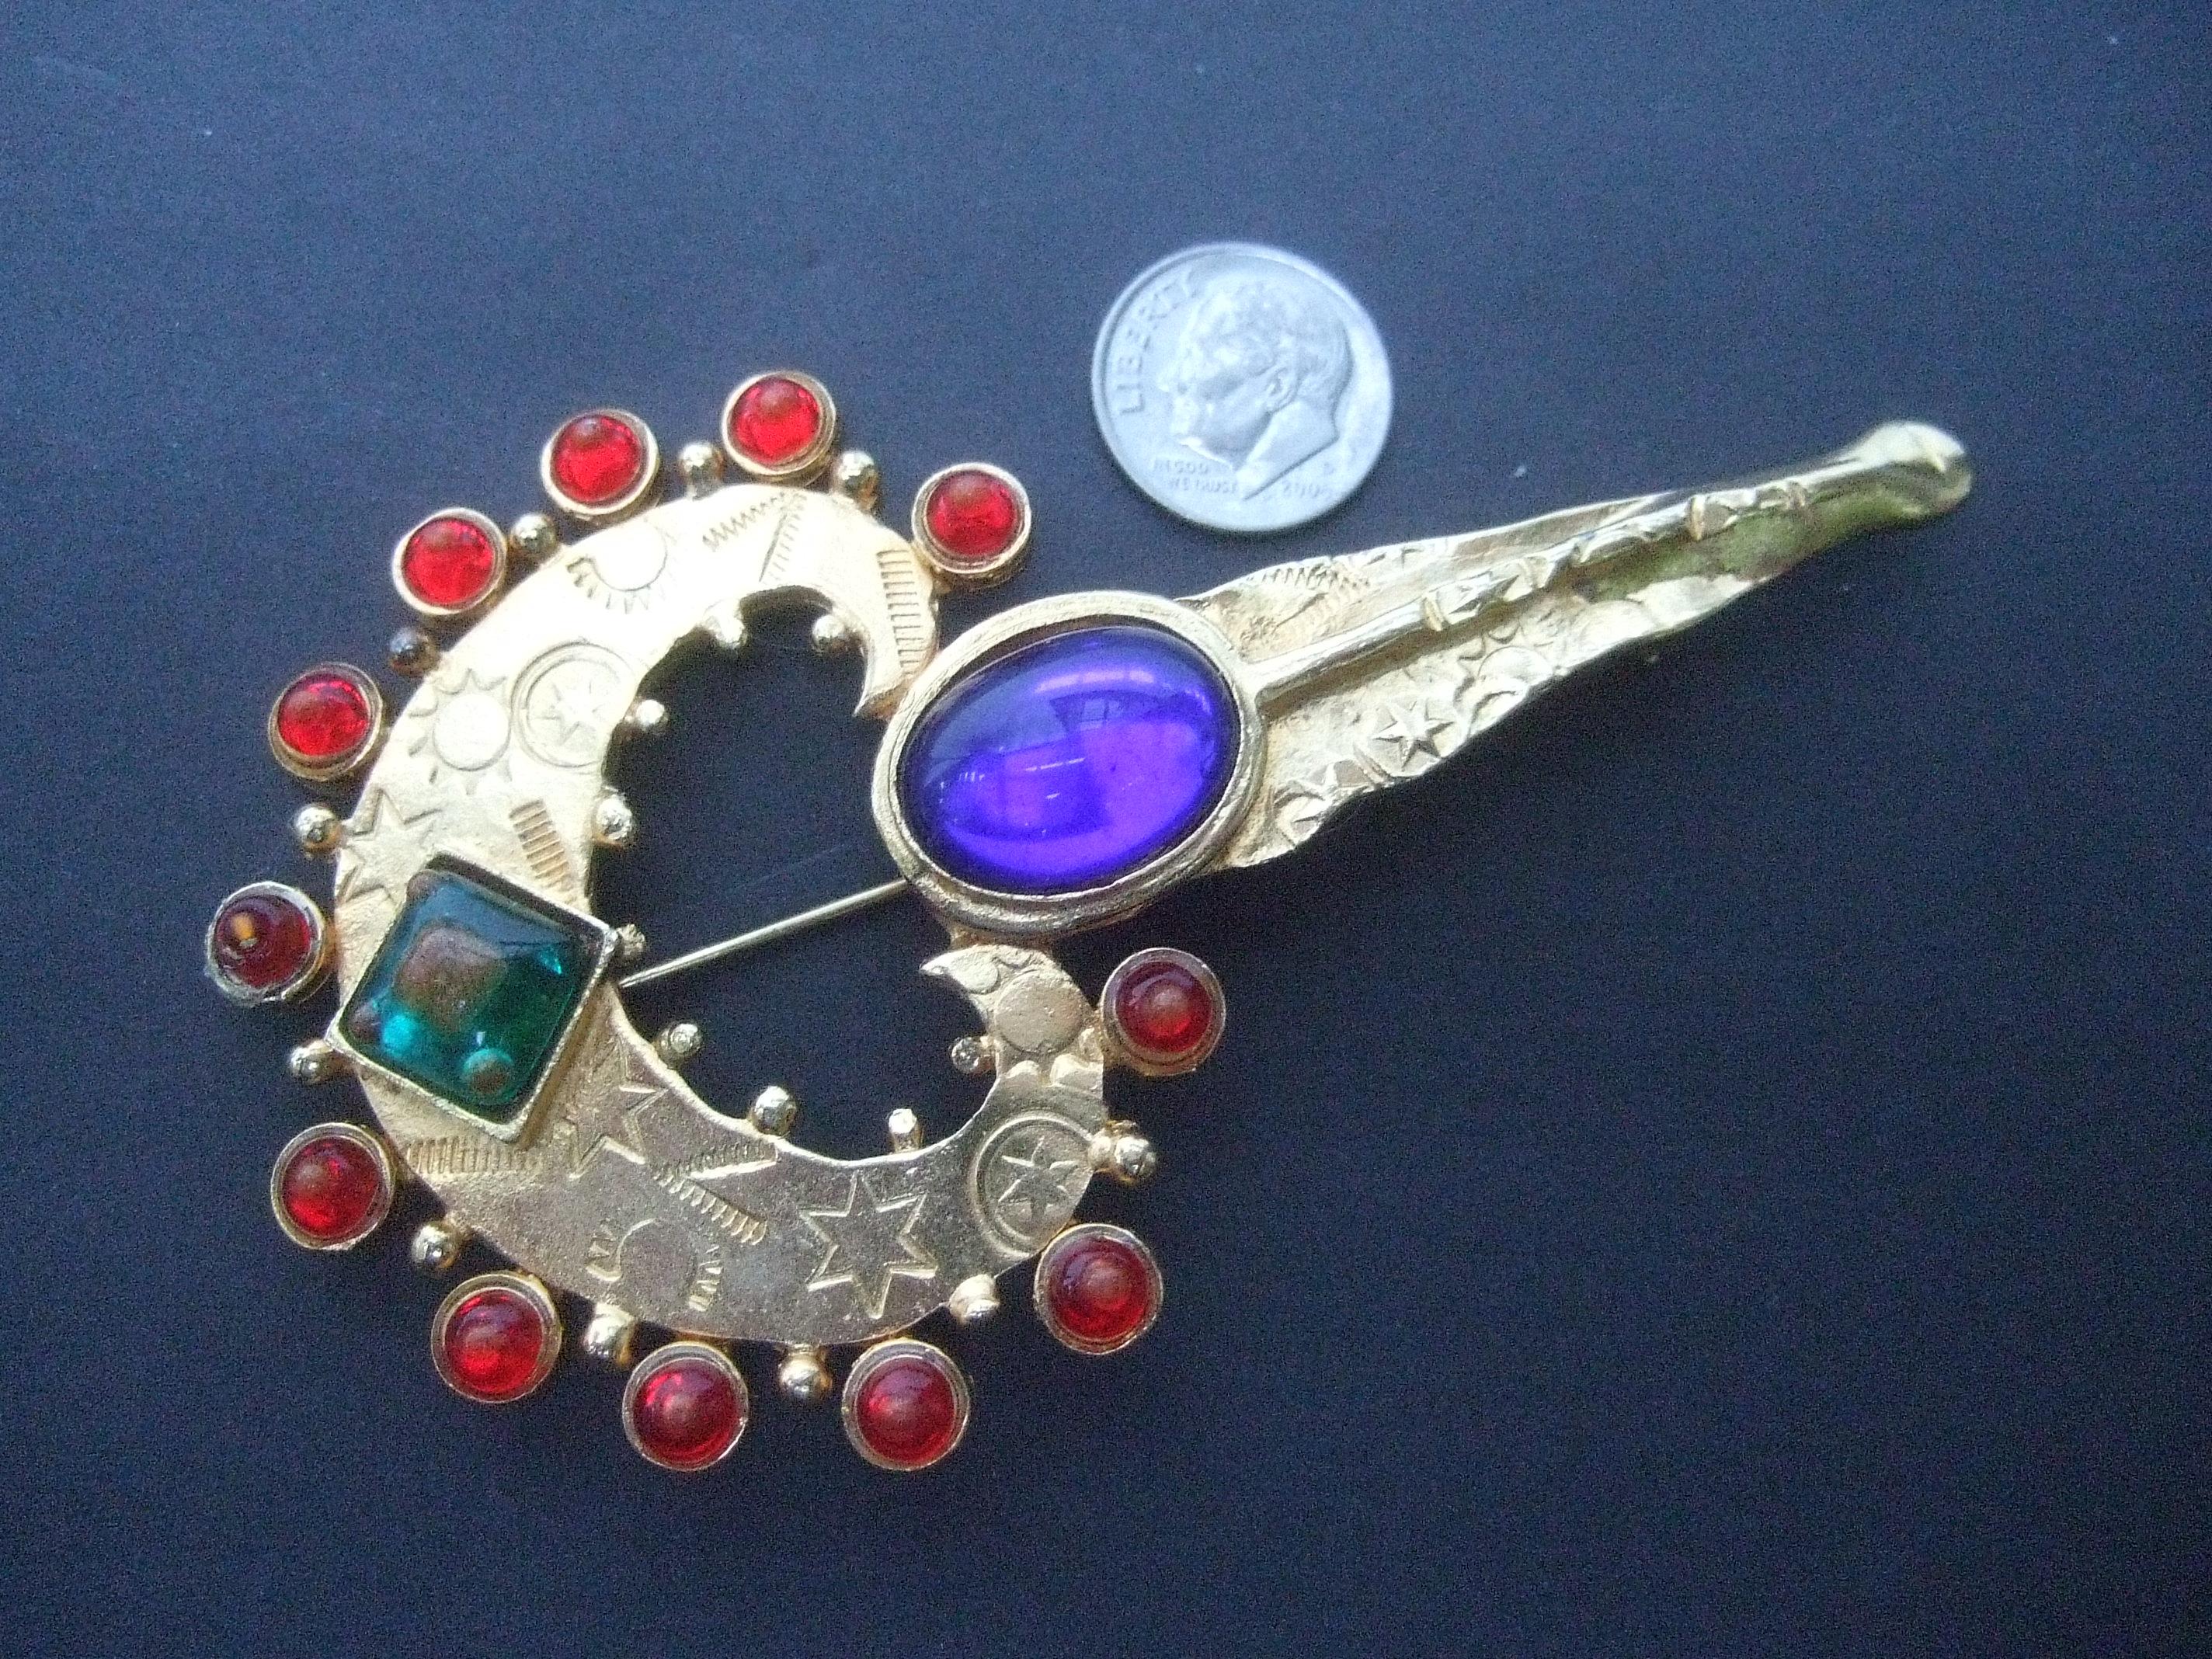 Glass Jeweled Heart & Key Brooch Designed by Robert Rose c 1980s For Sale 1